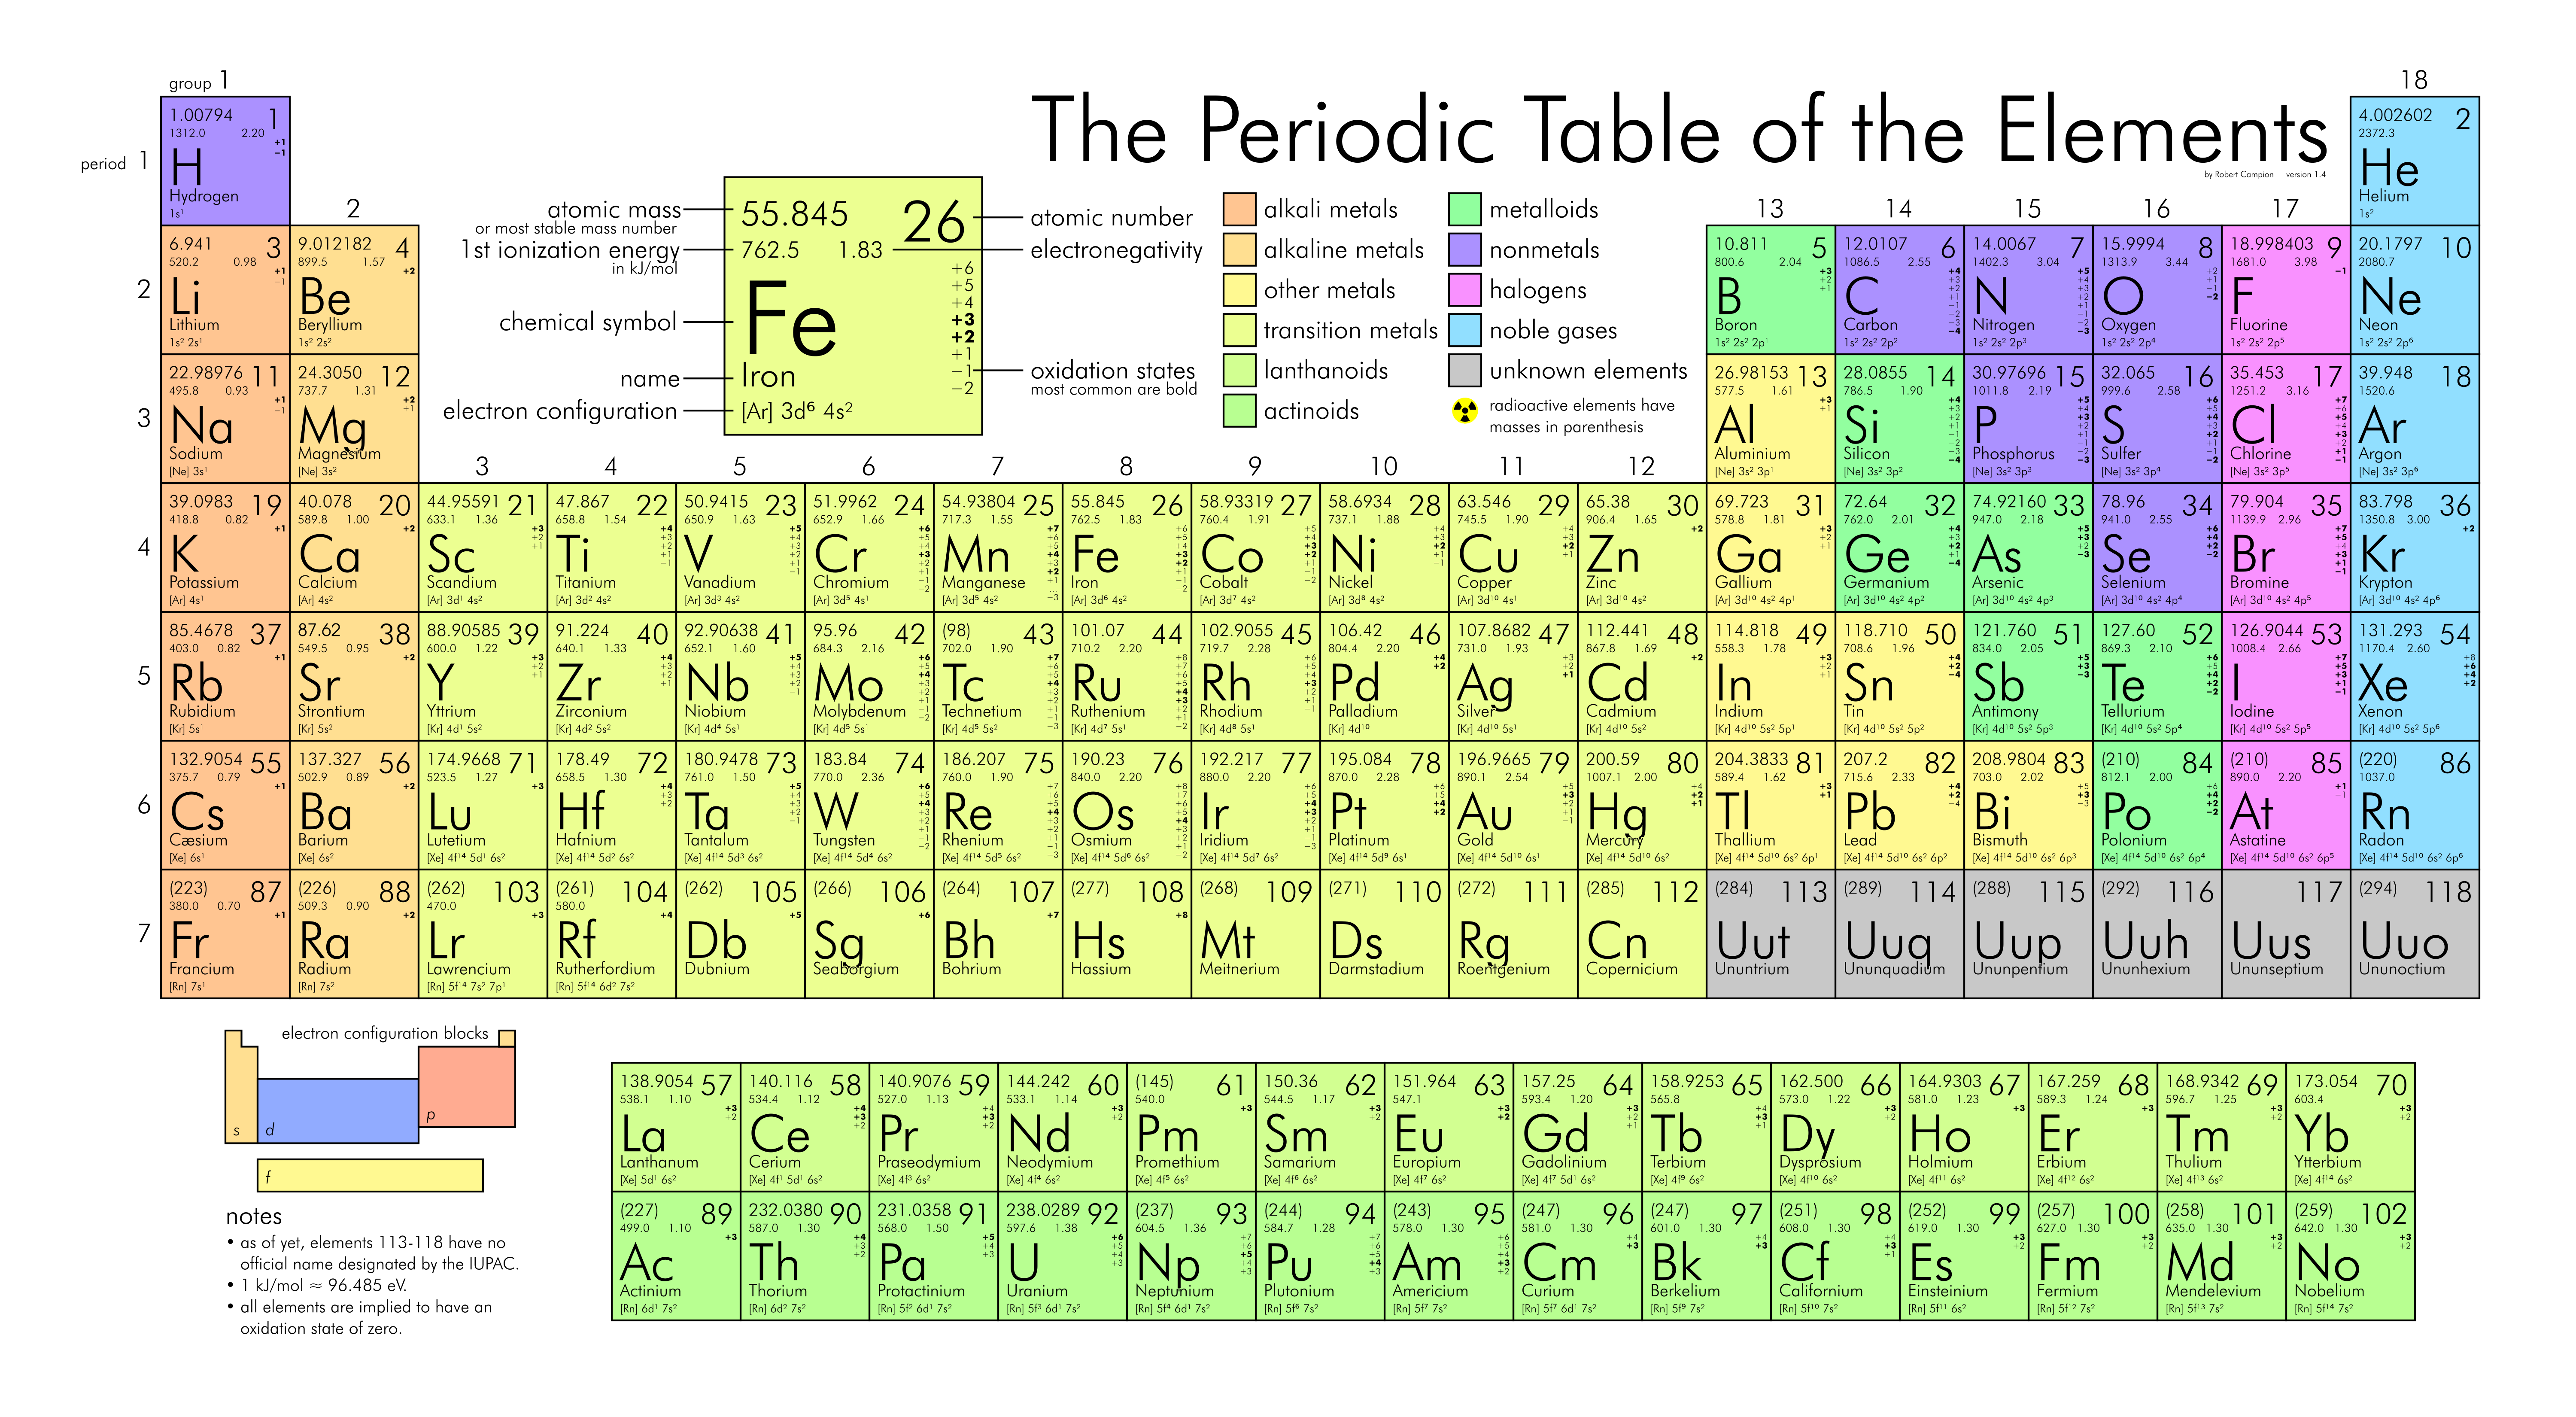 The periodic table of the elements of the world, showing element names, oxidation states, electron negativities, first ionization energies, and electron configurations. Public domain from: https://commons.wikimedia.org/wiki/File:Periodic_table_large.png is licensed under CC0 1.0 Universal